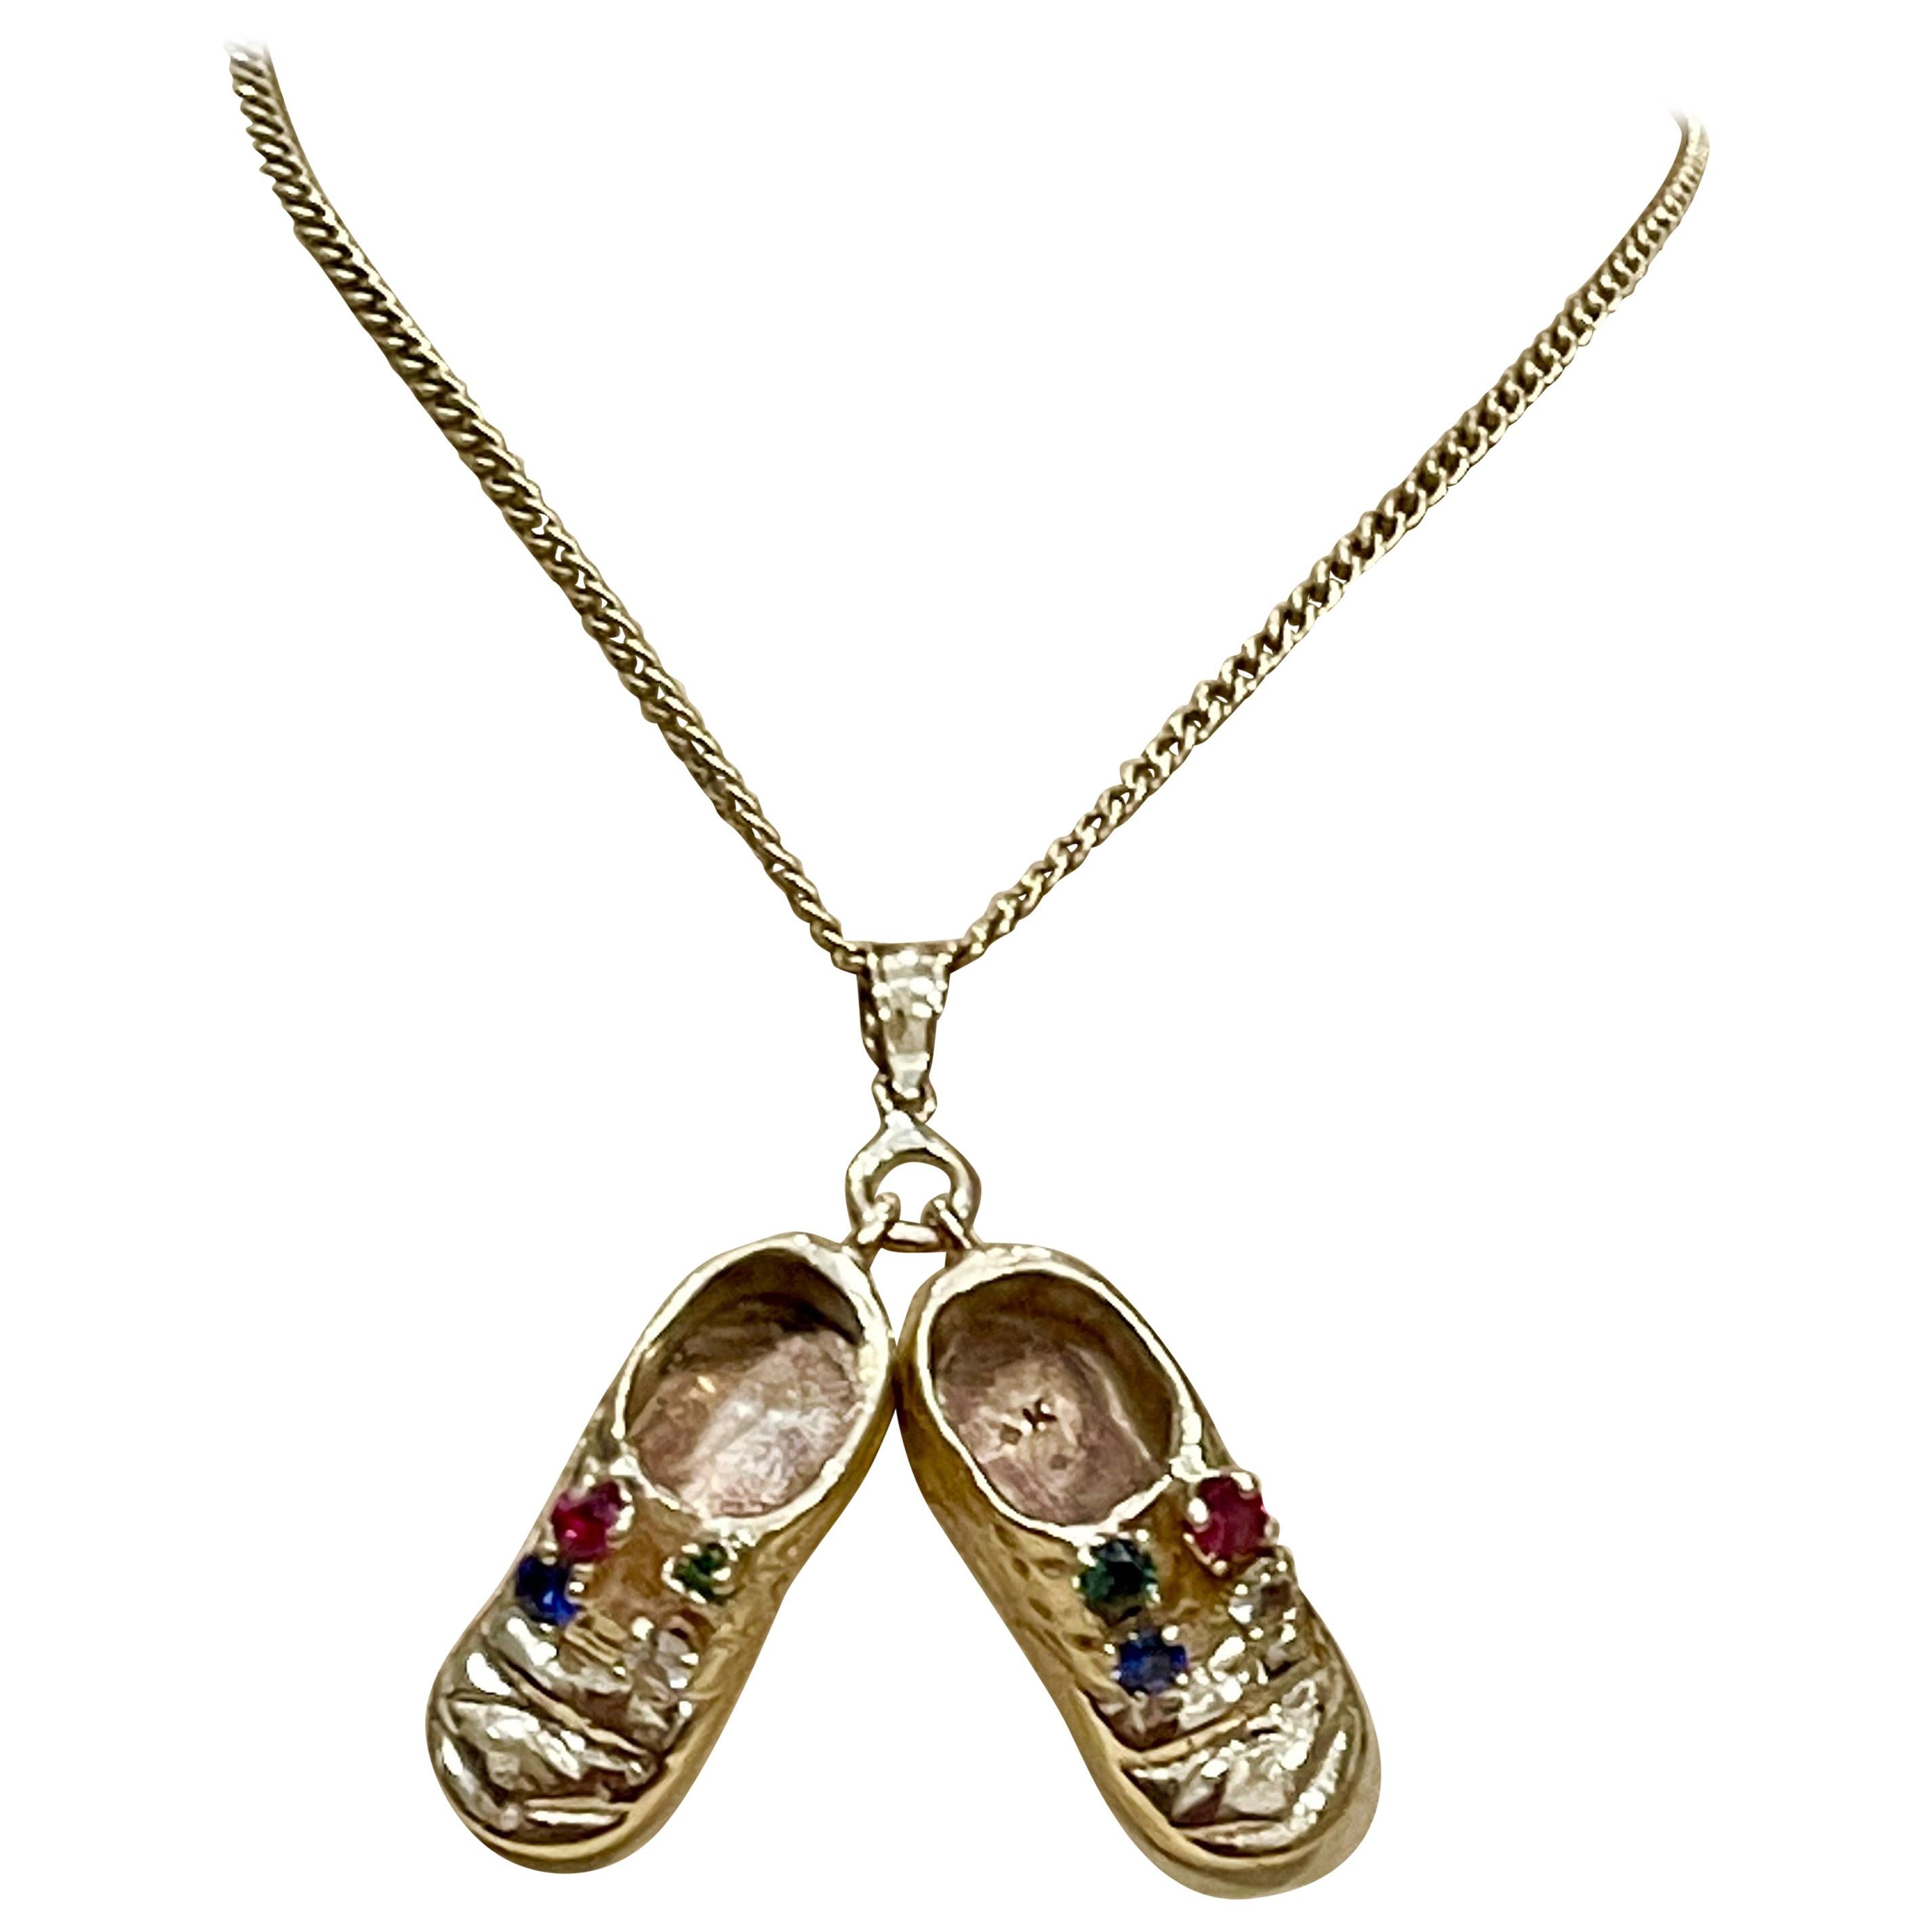 Pair of Shoe Charms with Precious Stone Pendant Necklace and Yellow Gold Chain For Sale